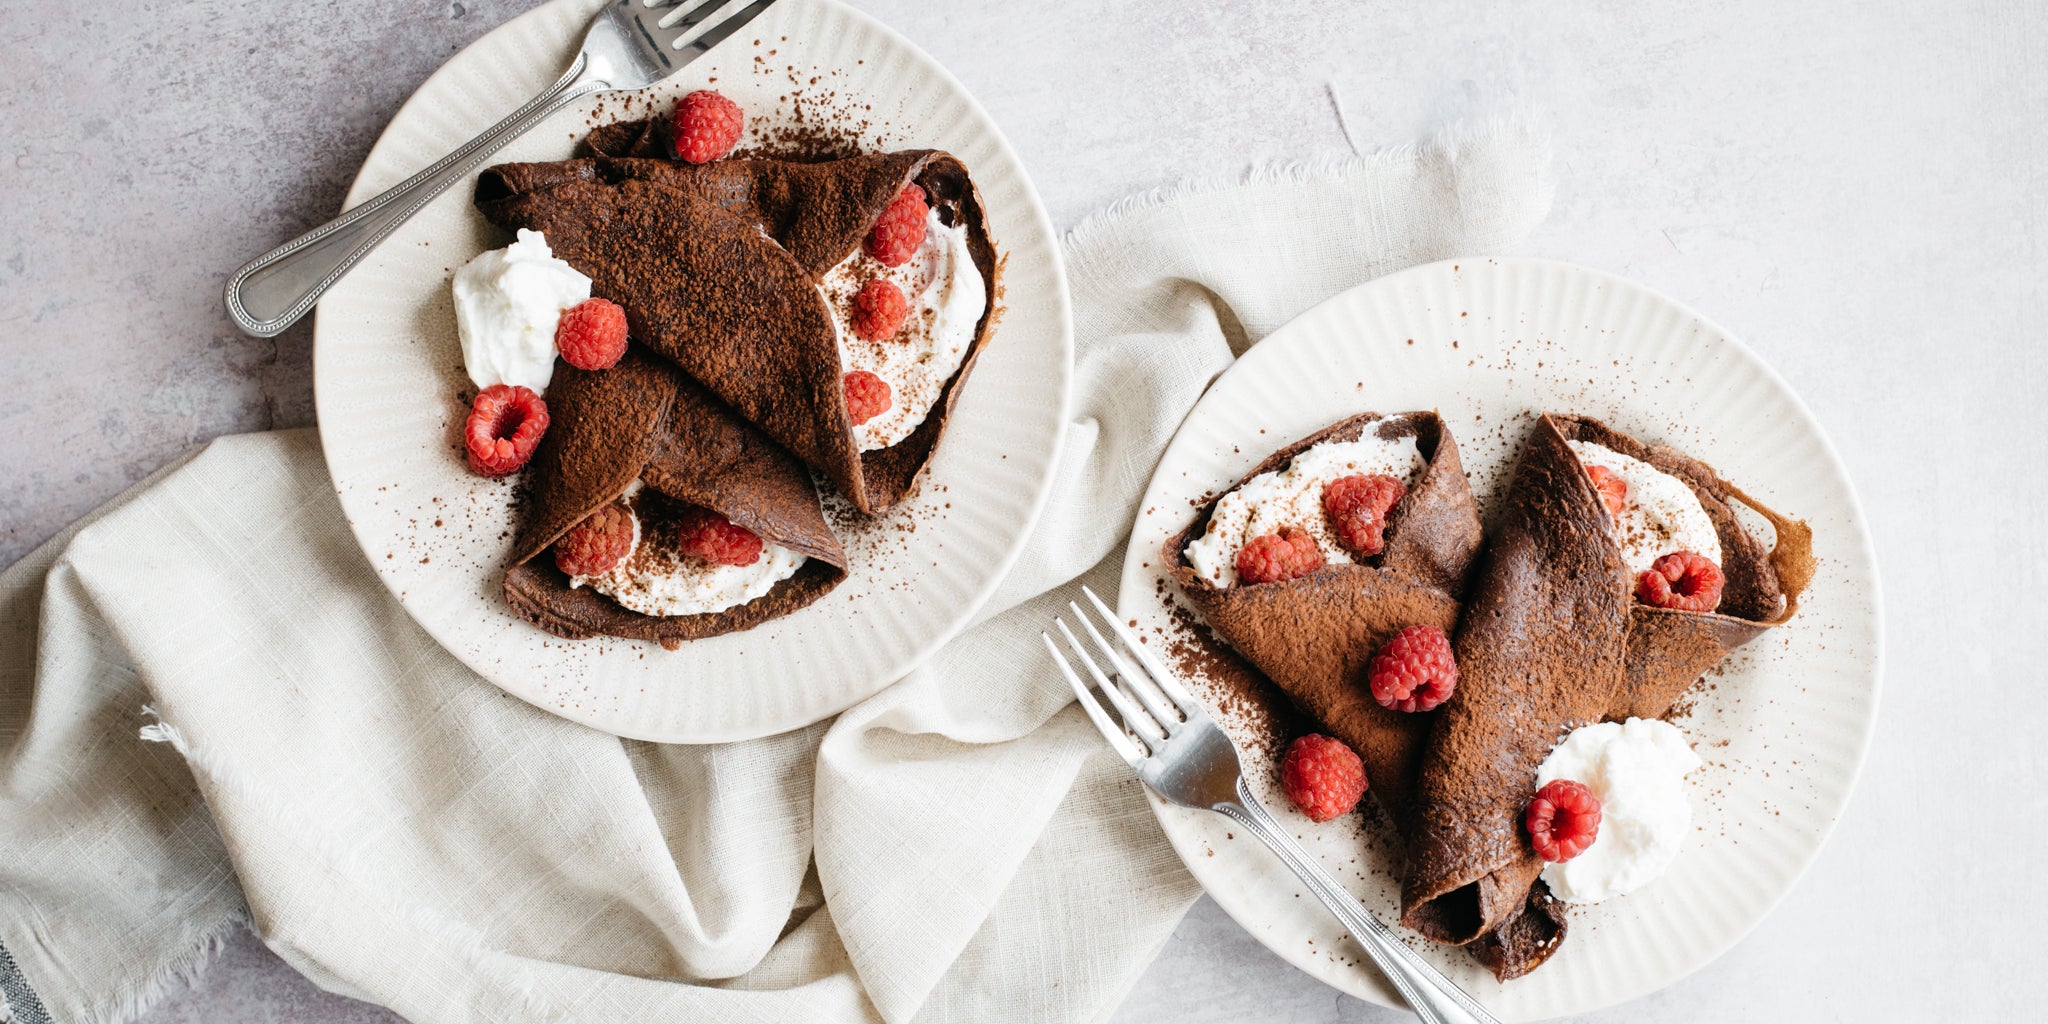 Two white plates with chocolate crepes, cream and raspberries